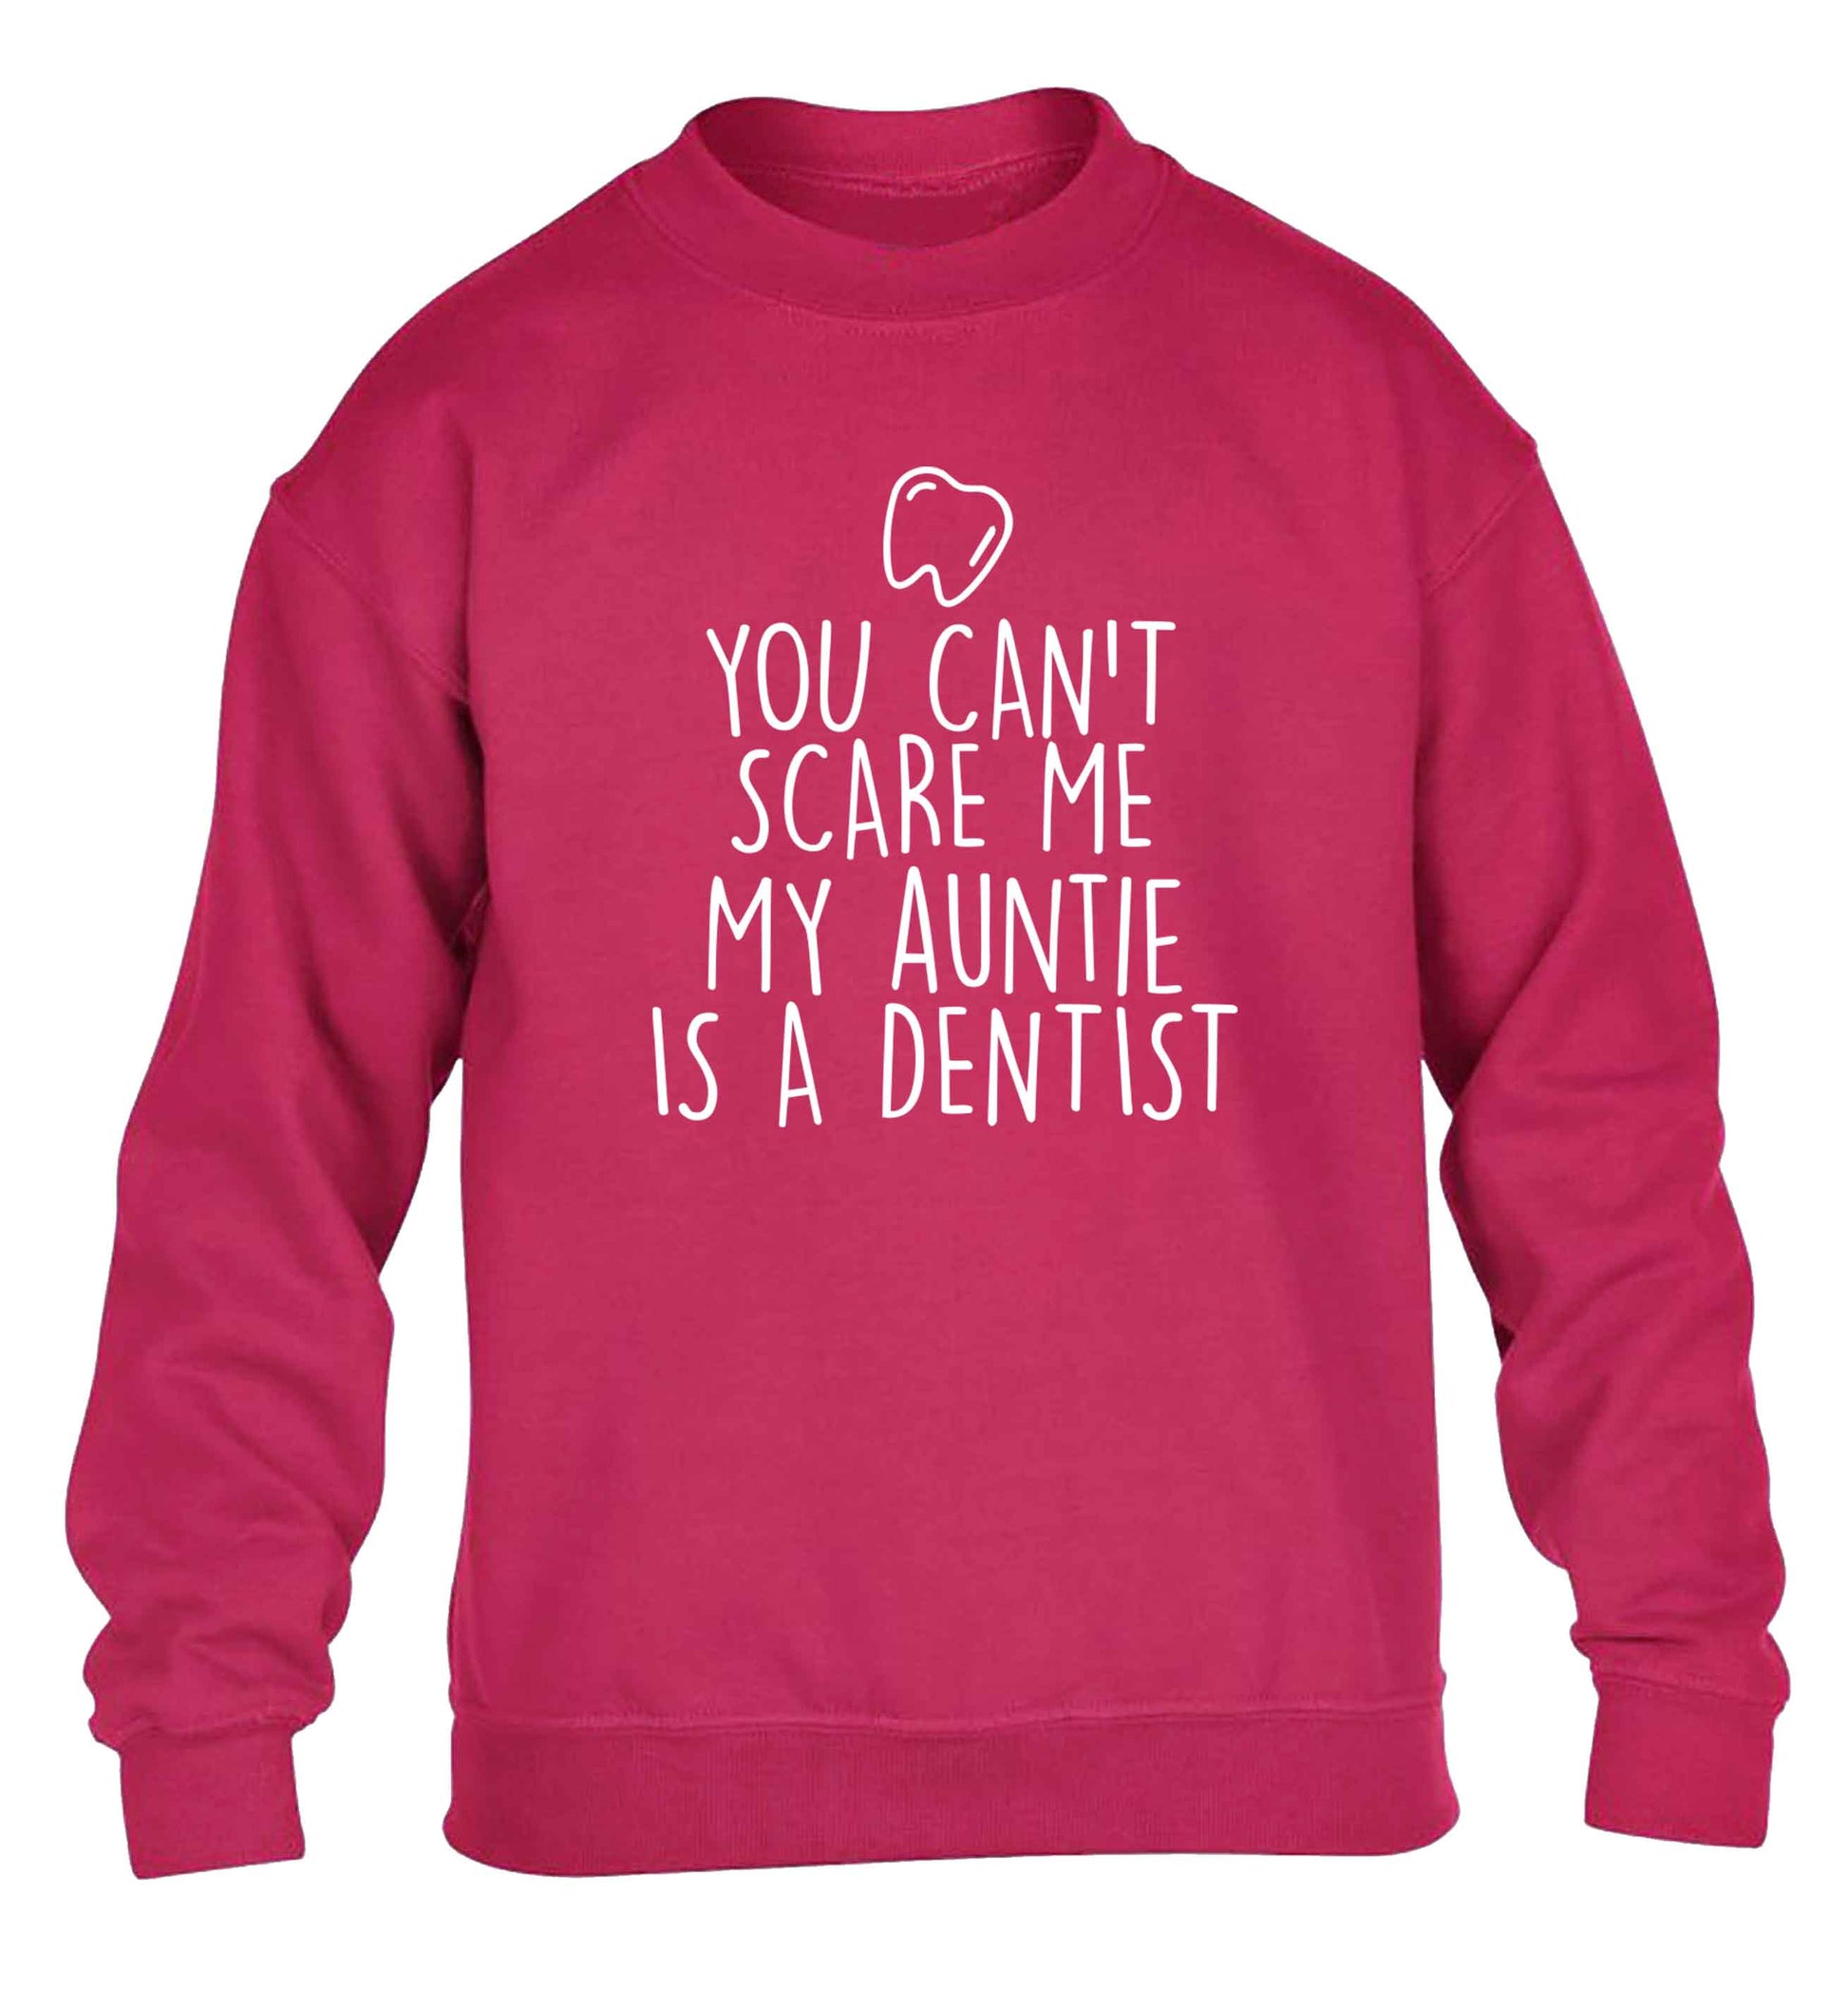 You can't scare me my auntie is a dentist children's pink sweater 12-13 Years